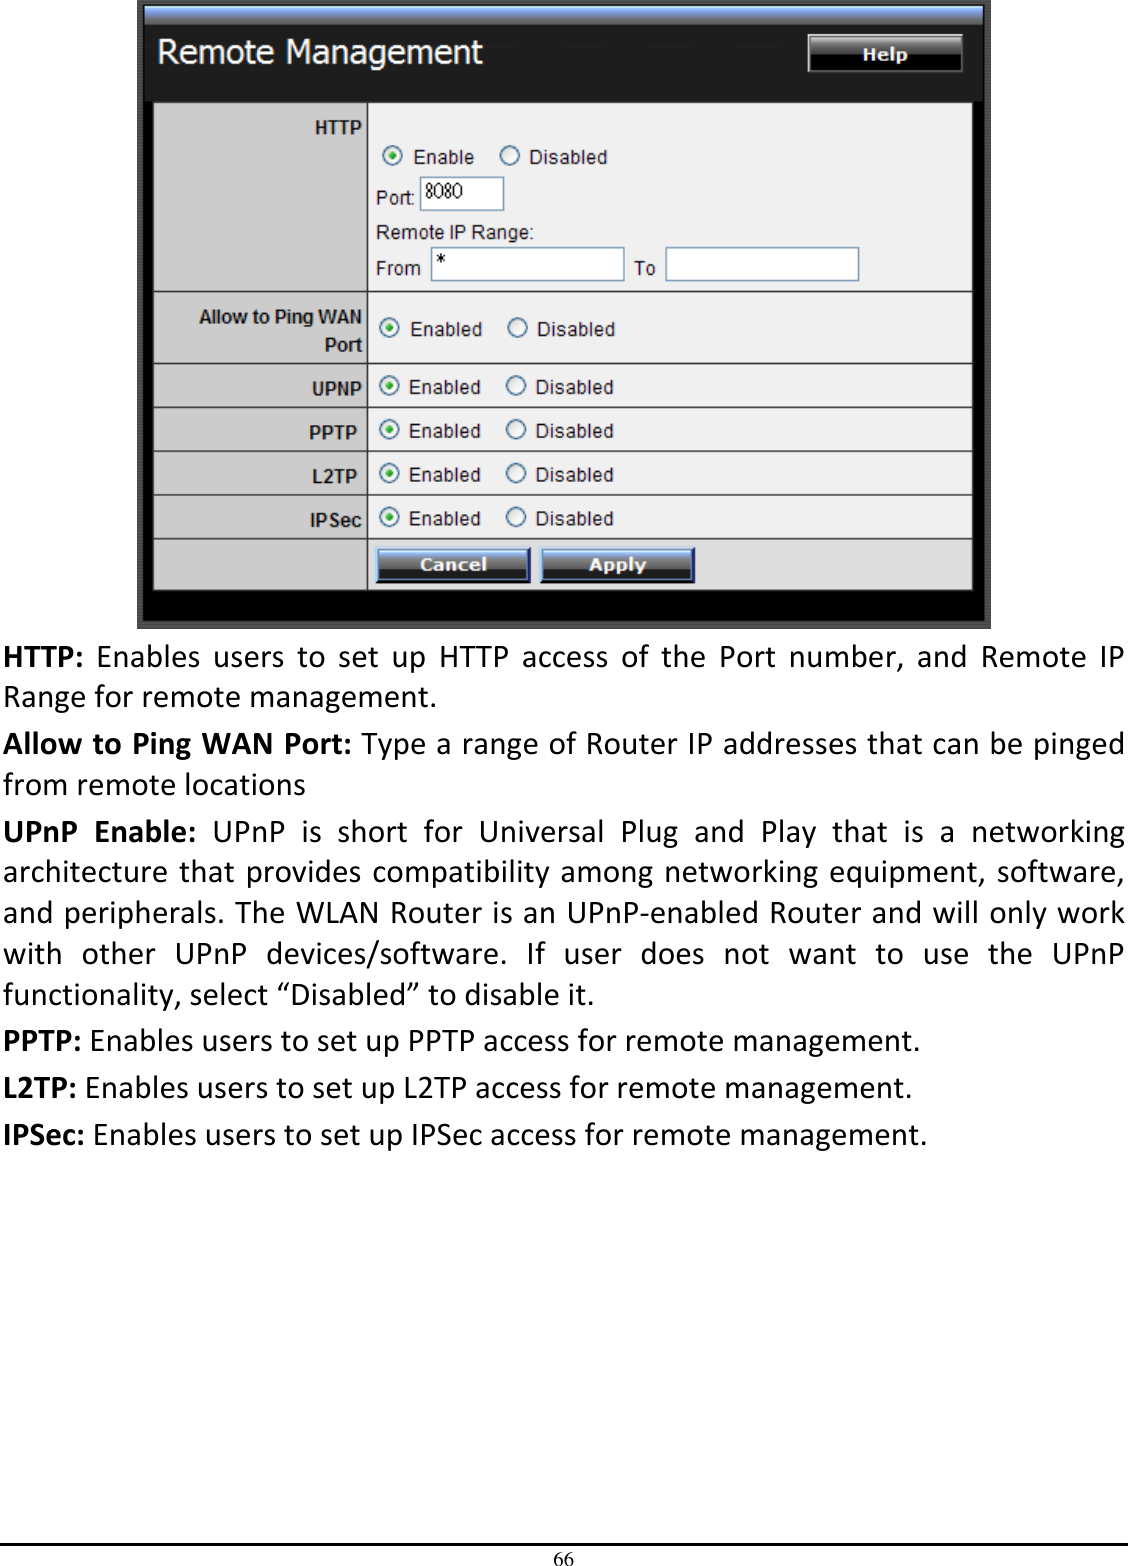 66  HTTP:  Enables  users  to  set  up  HTTP  access  of  the  Port  number,  and  Remote  IP Range for remote management. Allow to Ping WAN Port: Type a range of Router IP addresses that can be pinged from remote locations UPnP  Enable:  UPnP  is  short  for  Universal  Plug  and  Play  that  is  a  networking architecture that provides compatibility among networking equipment, software, and peripherals. The WLAN Router is an UPnP-enabled Router and will only work with  other  UPnP  devices/software.  If  user  does  not  want  to  use  the  UPnP functionality, select “Disabled” to disable it. PPTP: Enables users to set up PPTP access for remote management. L2TP: Enables users to set up L2TP access for remote management. IPSec: Enables users to set up IPSec access for remote management. 